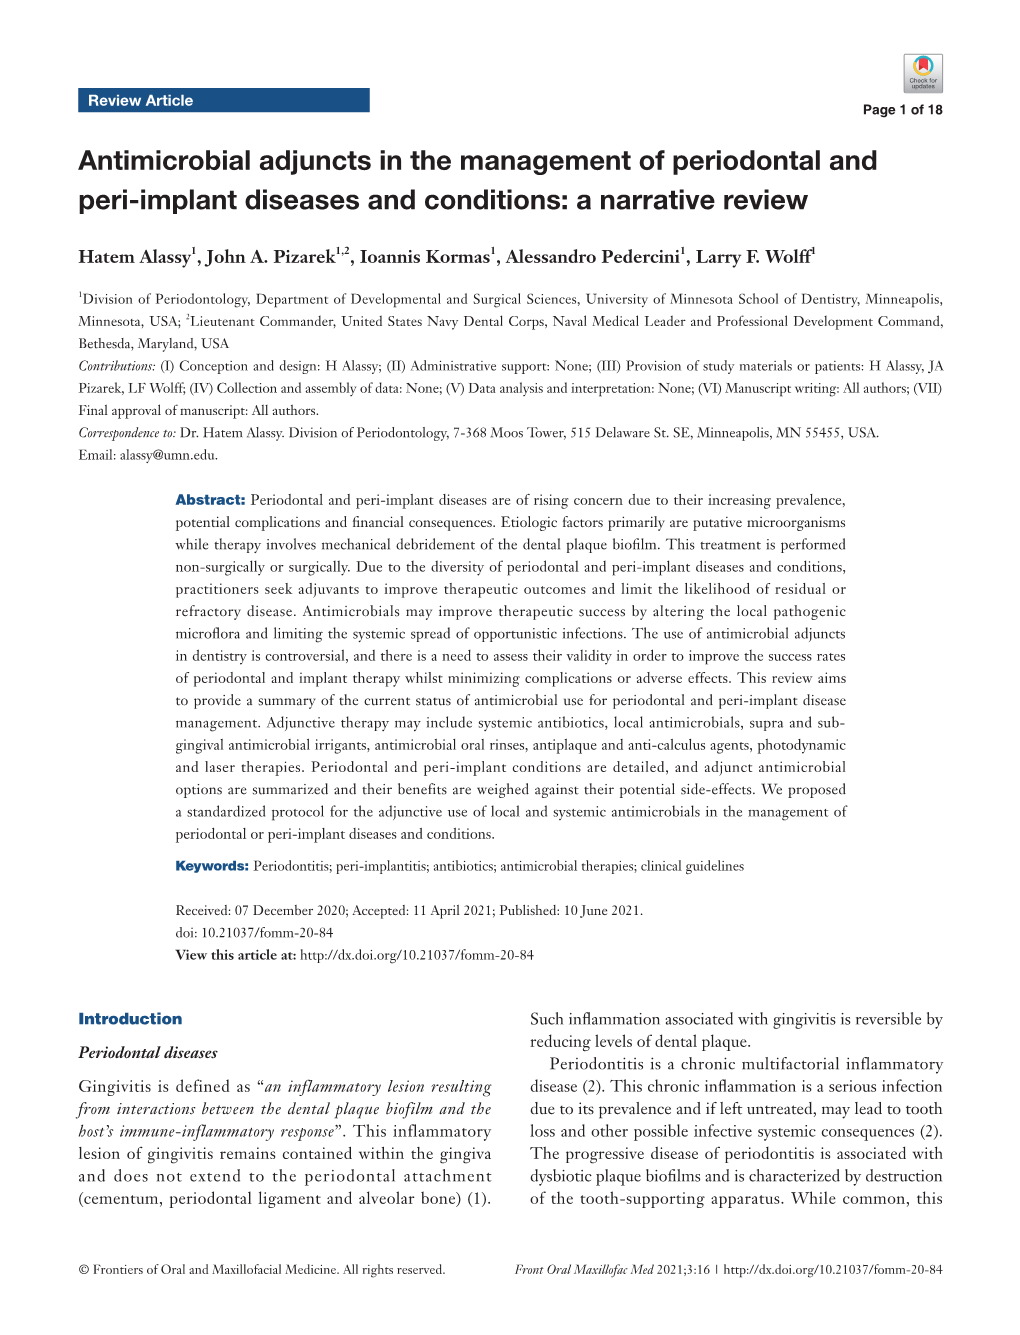 Antimicrobial Adjuncts in the Management of Periodontal and Peri-Implant Diseases and Conditions: a Narrative Review